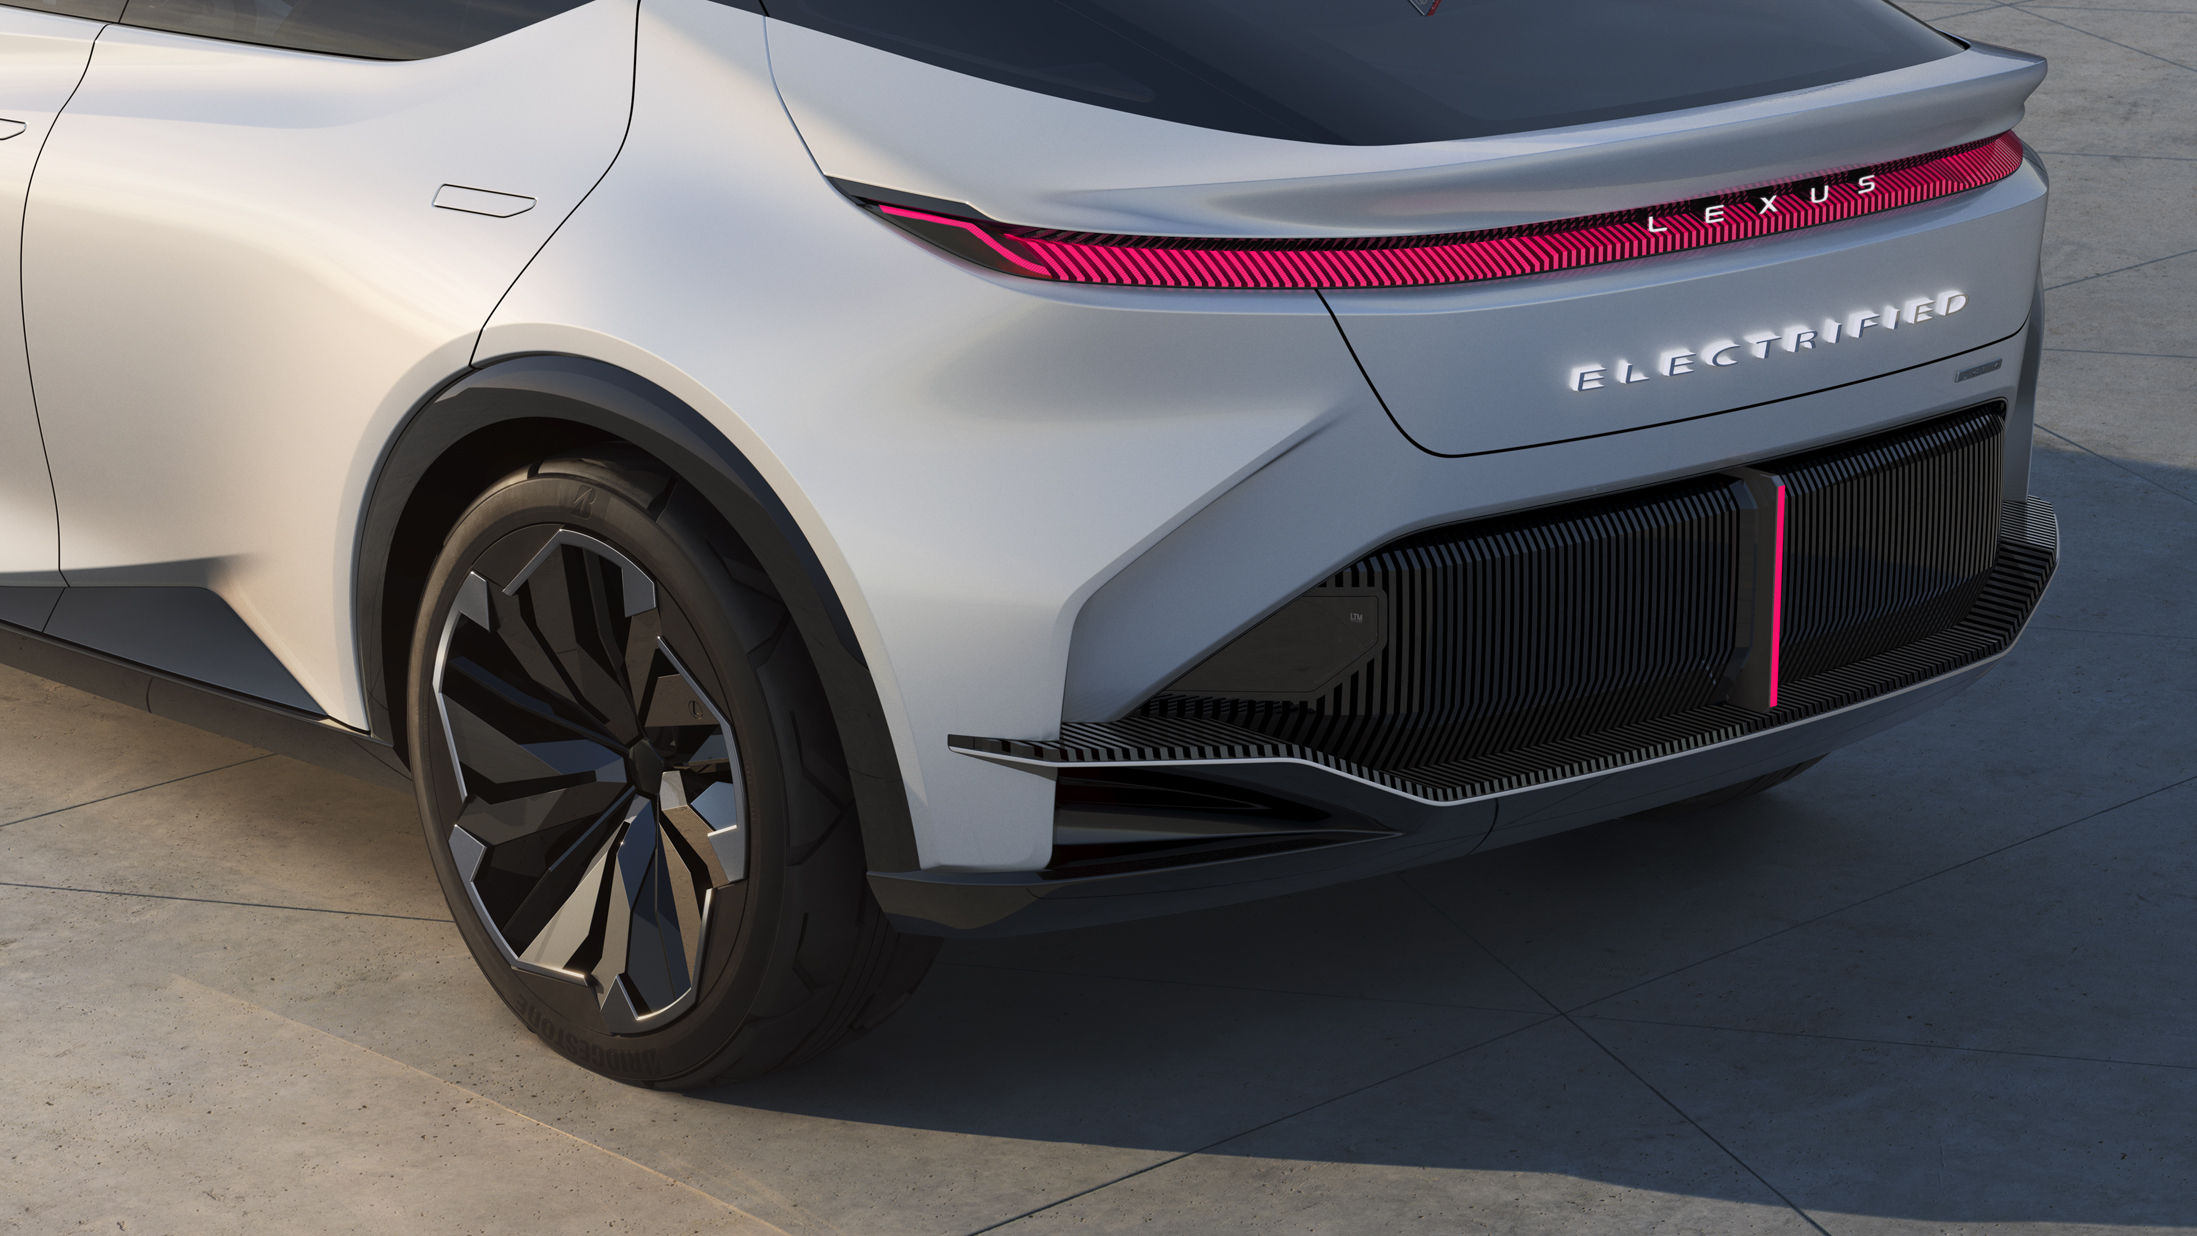 Lexus unveils electric SUV concept that is 'symbolic' of its next